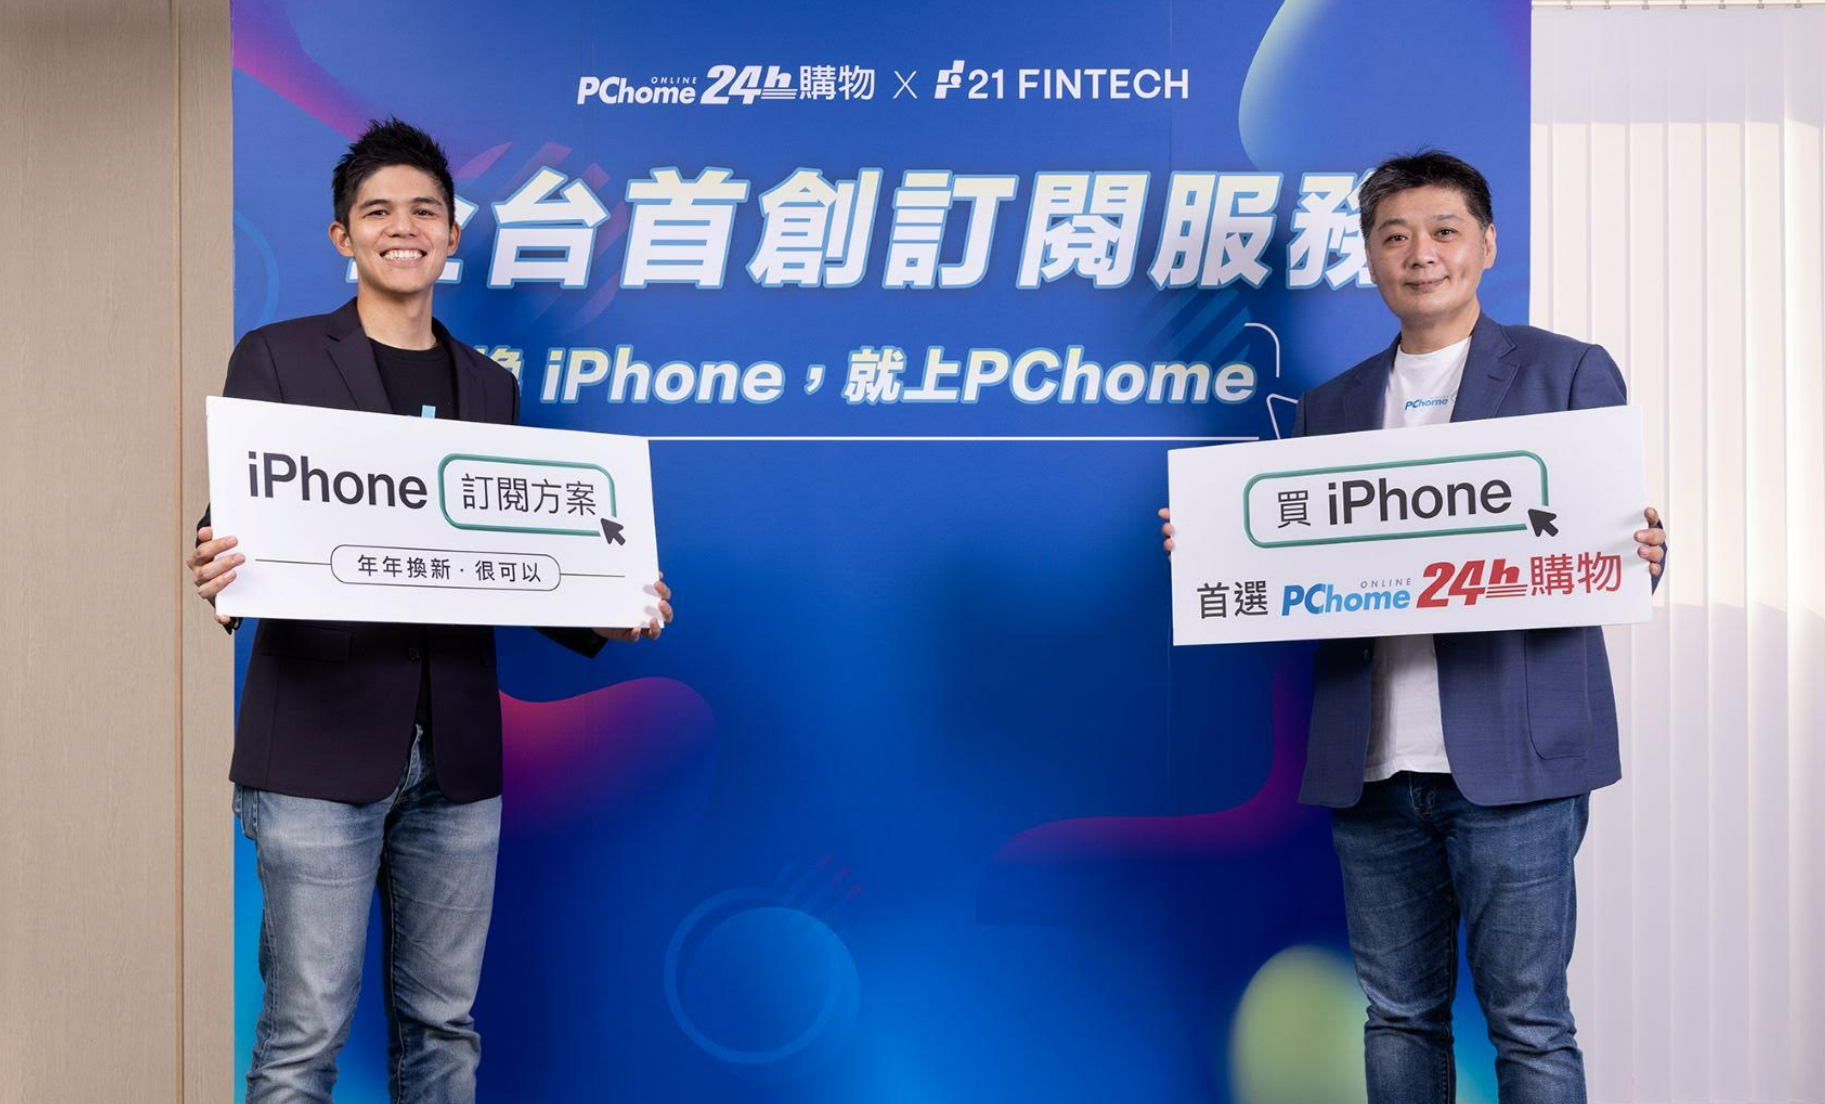 The Level of iPhone Panic-Buying Surpasses Last Year! The Sales of PChome 24h Shopping Grow by Double Digits and the Annual Subscriptions Increase by 50%